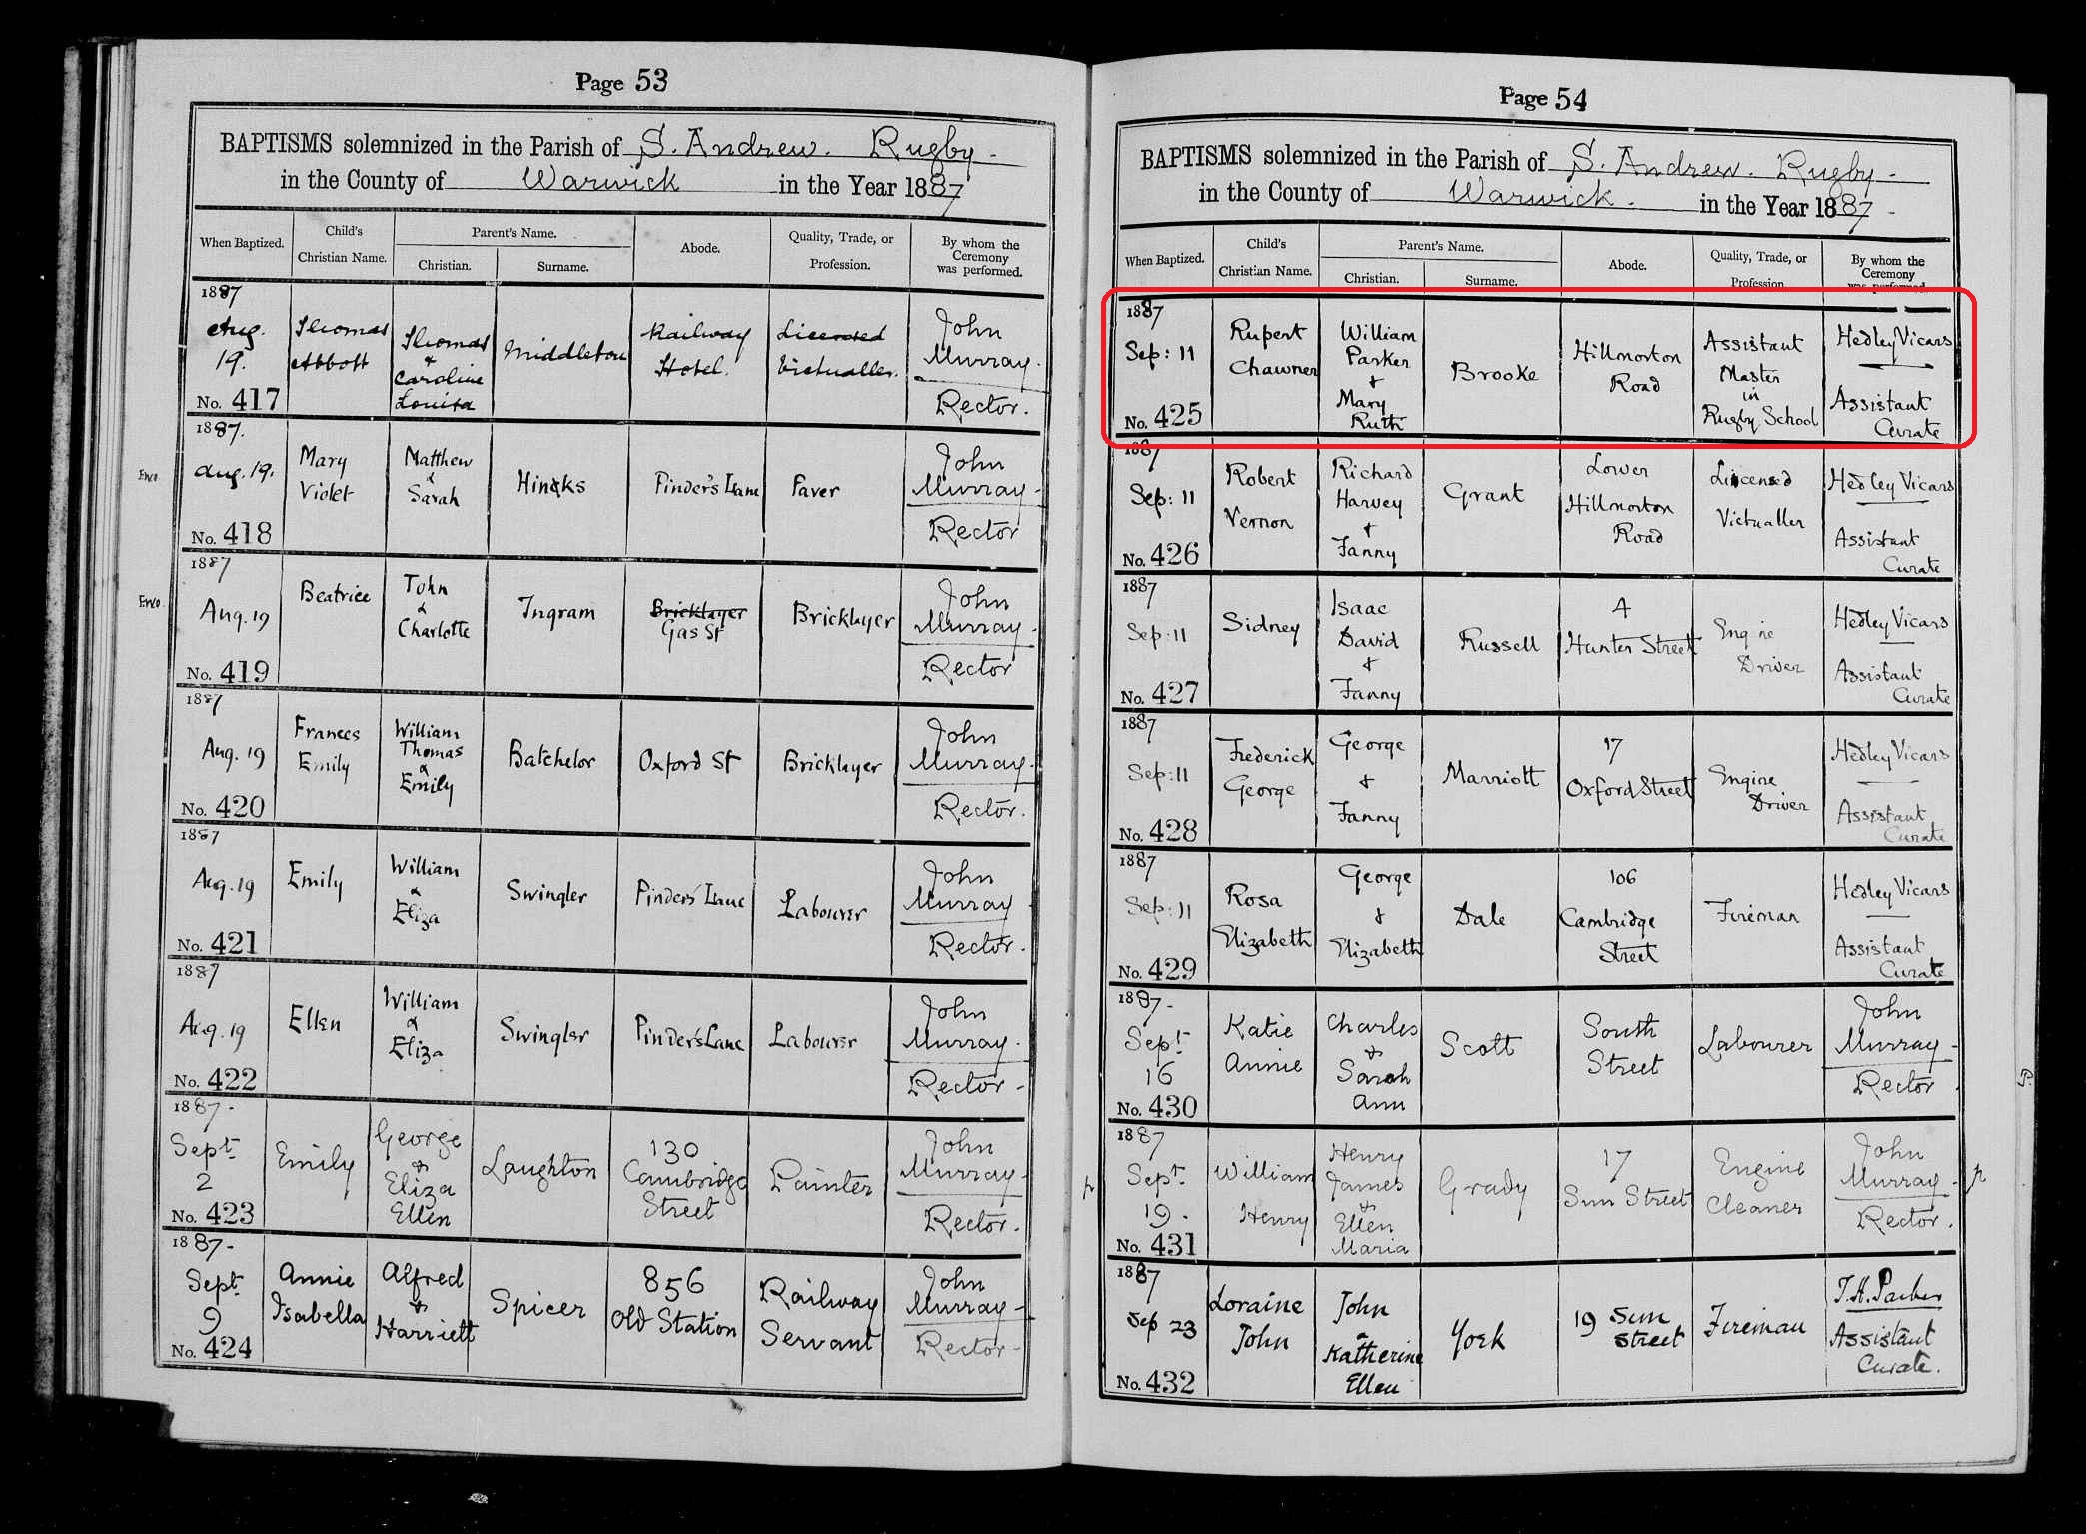 Image of the baptism record for Rupert Chawner Brooke